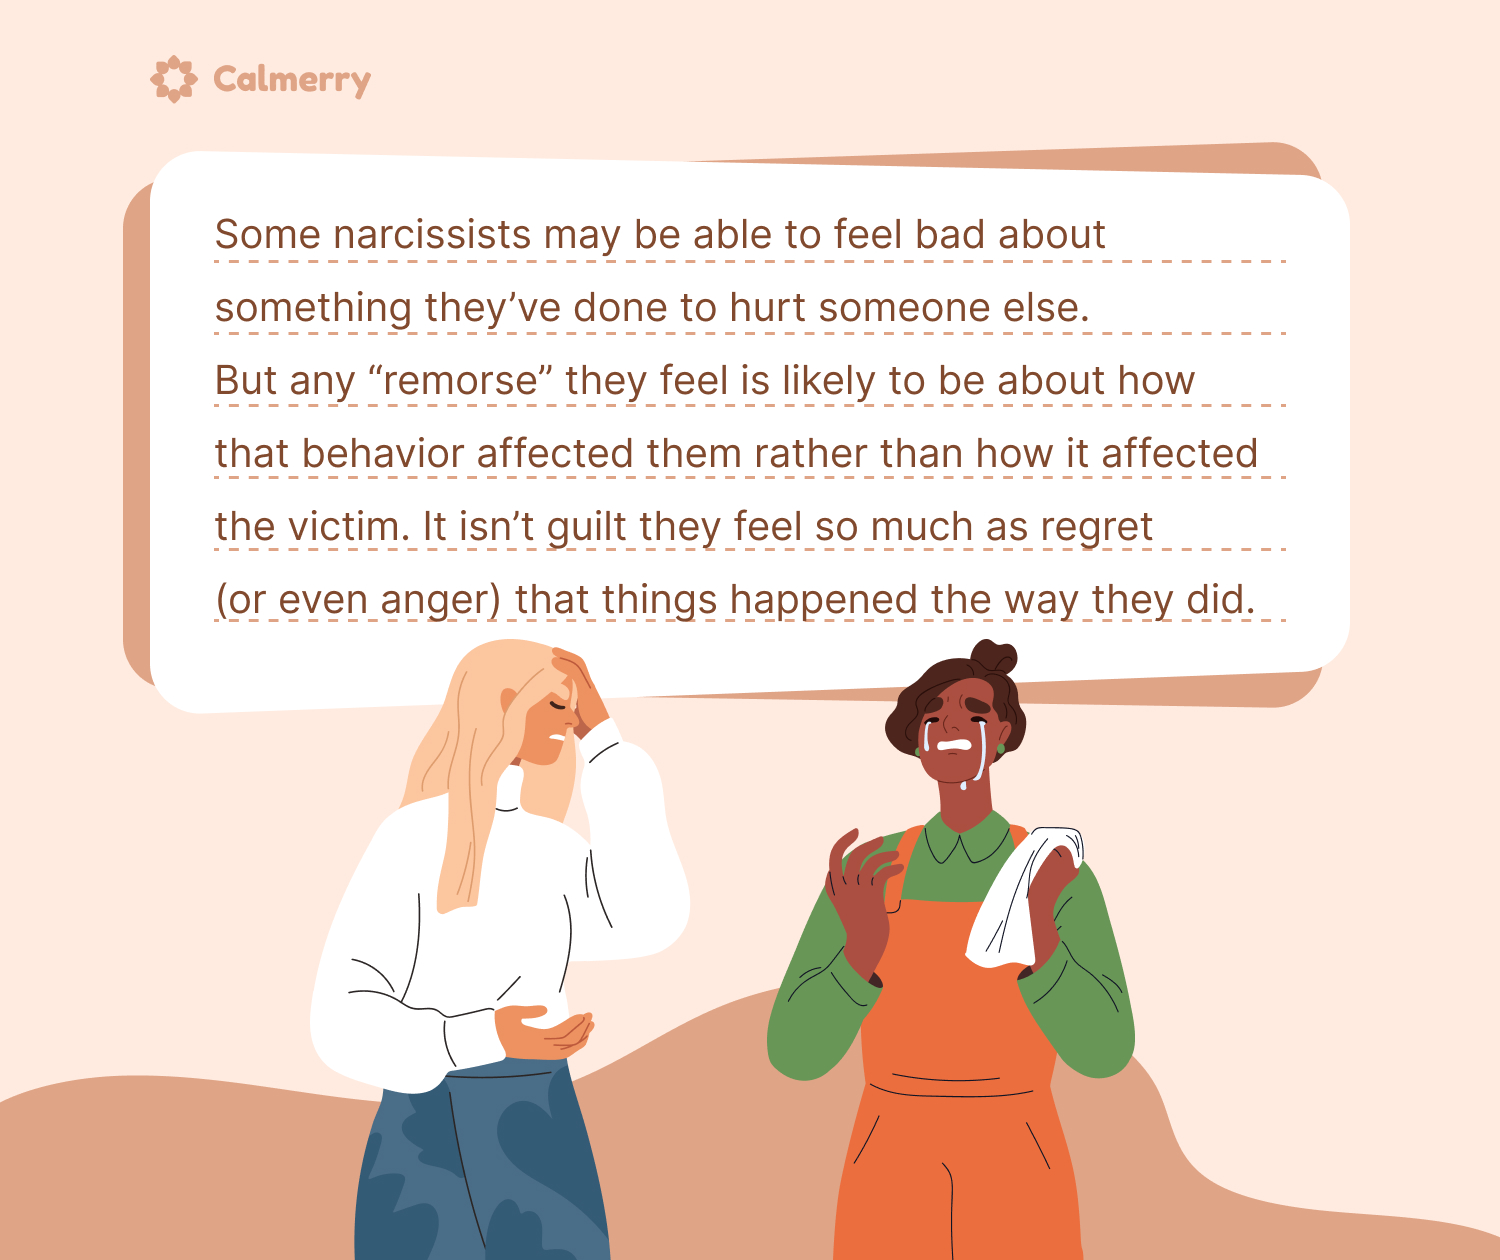 Some narcissists may be able to feel bad about something they’ve done to hurt someone else.